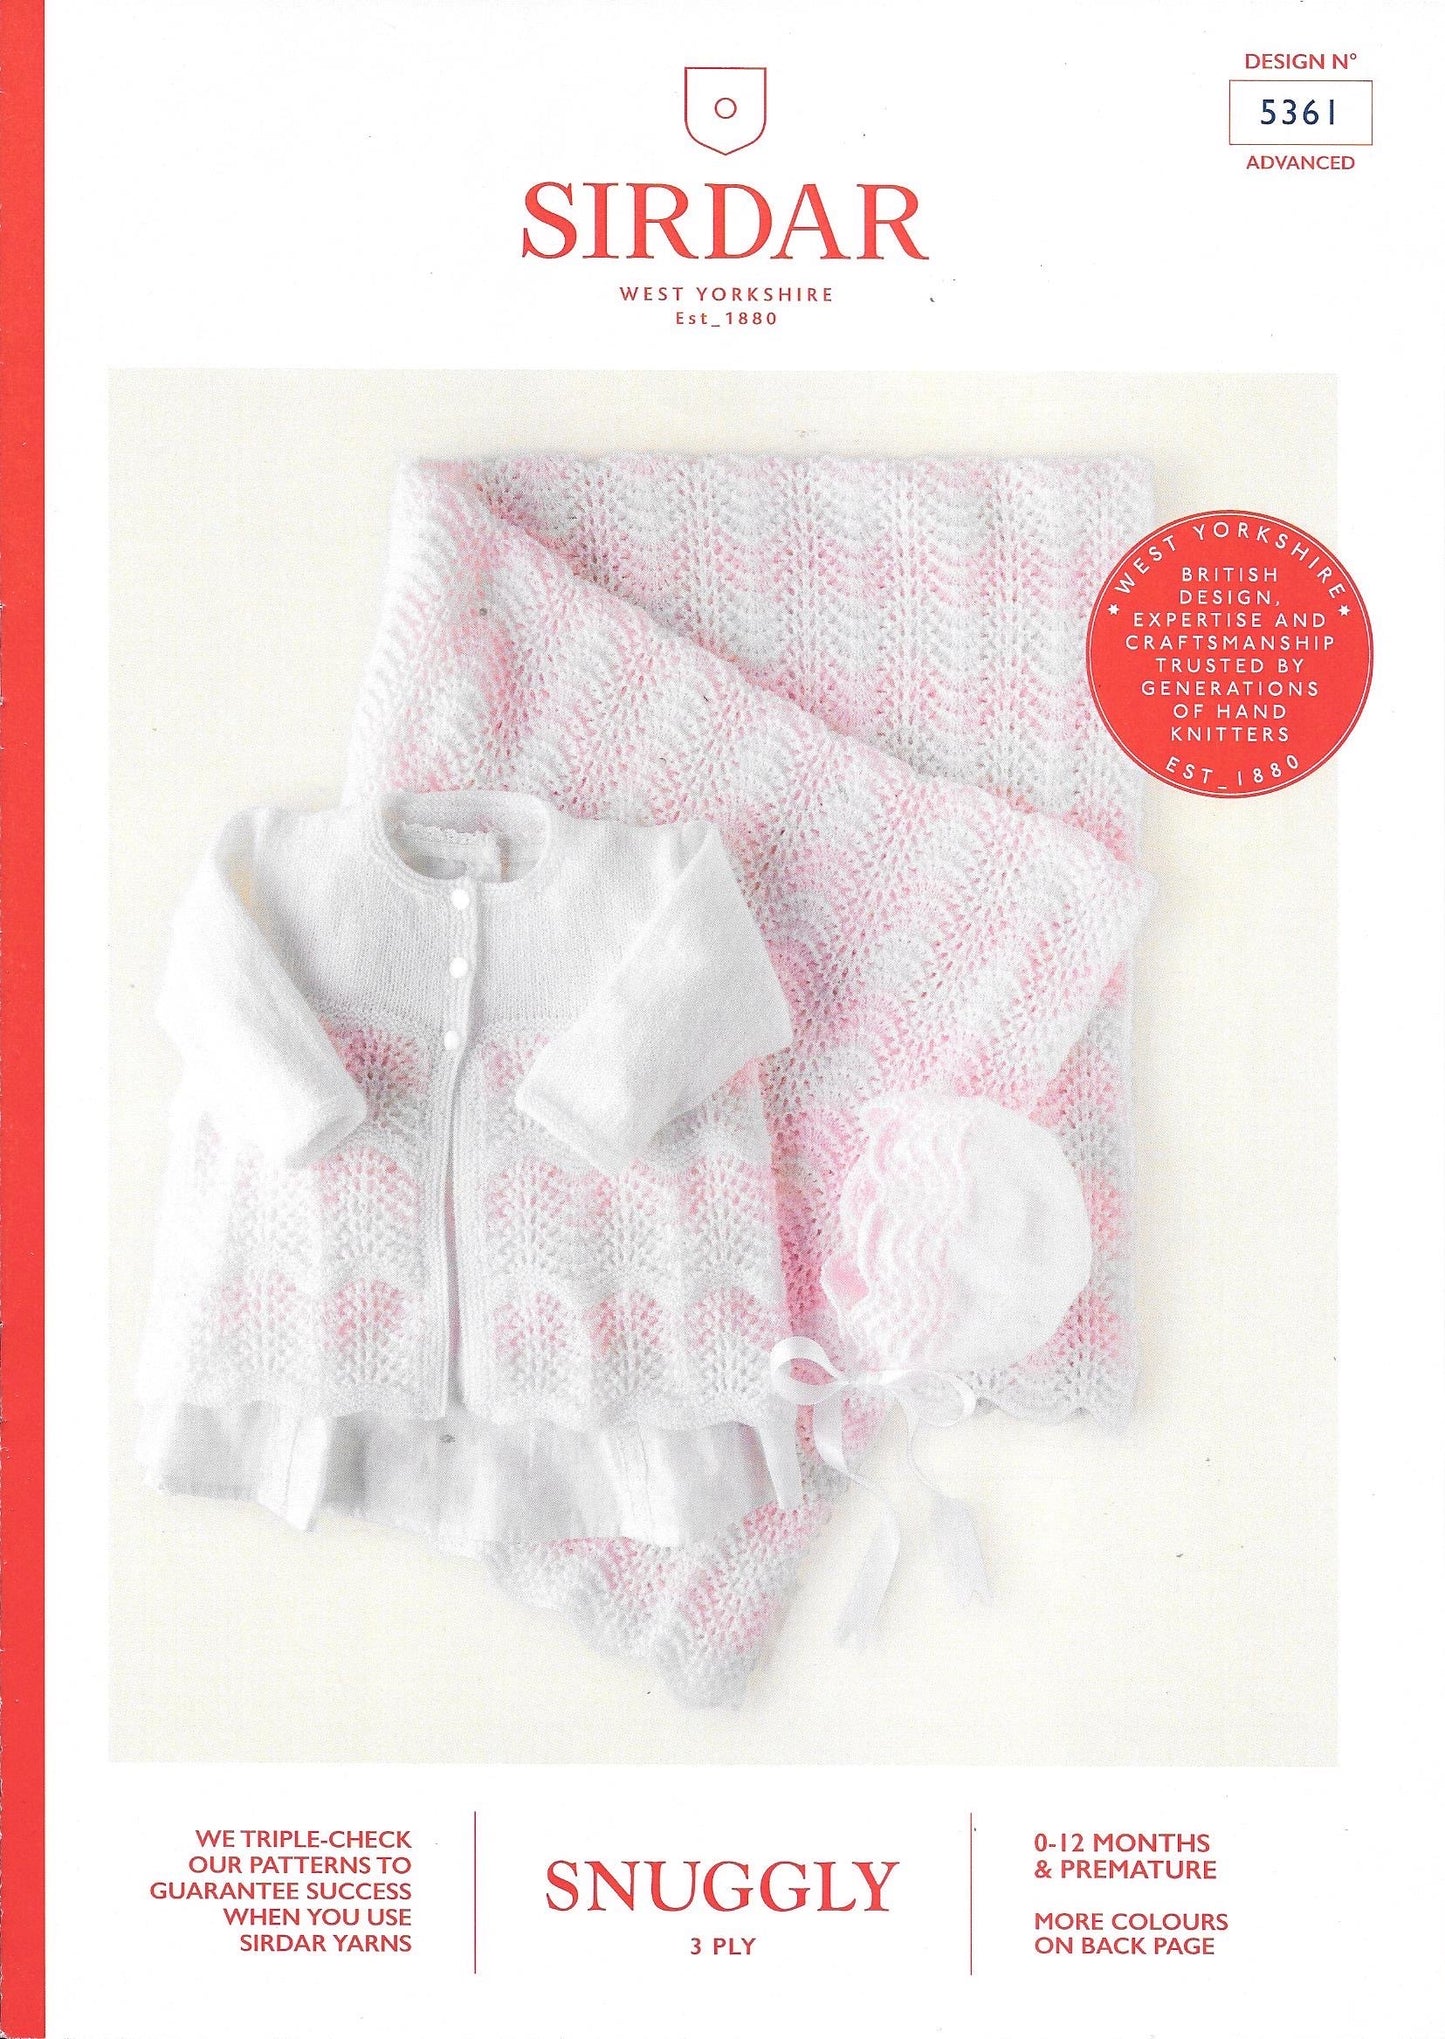 5361 Sirdar Snuggly 3ply premature and baby coat, bonnet and blanket